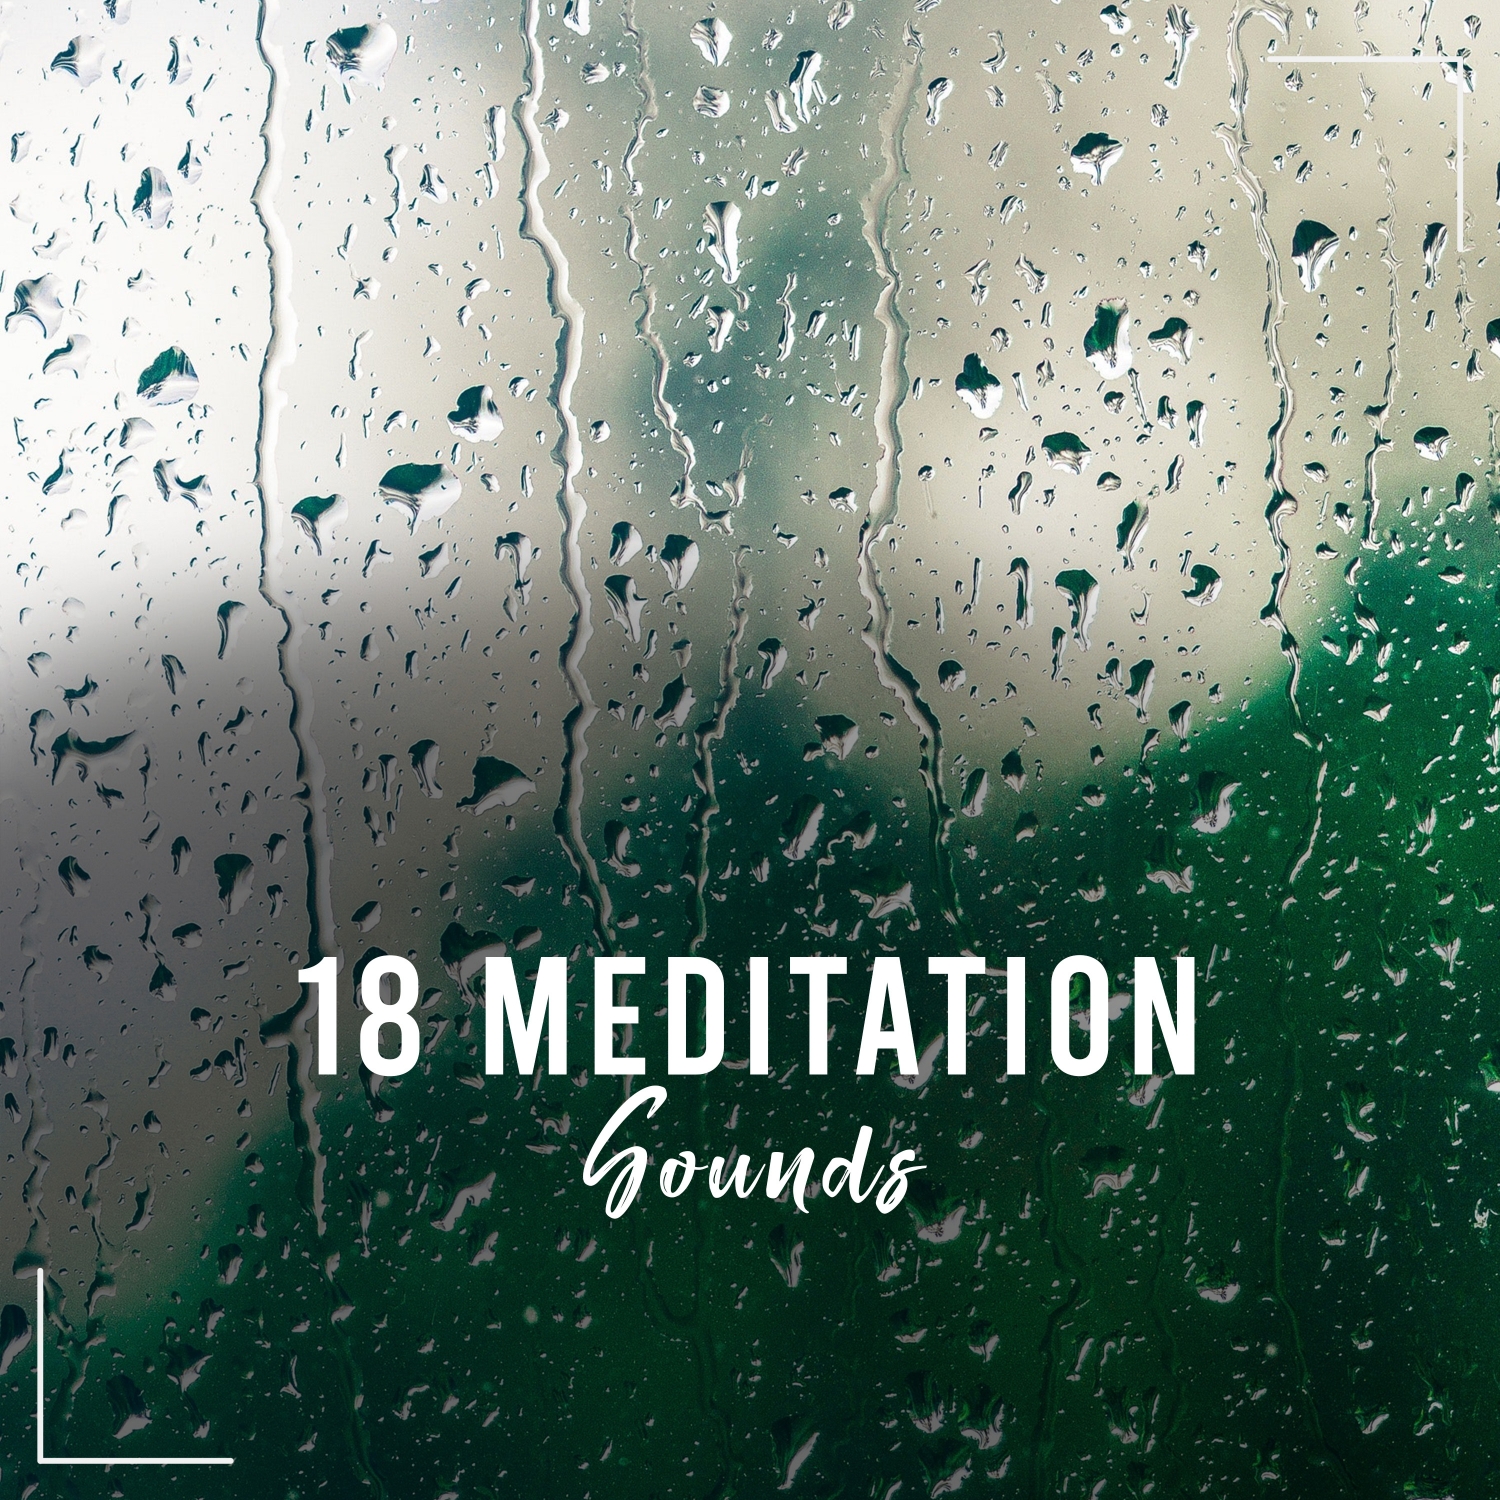 18 Meditation Sounds for Deep Concentration, Sleep, Yoga and Meditation. Help Baby Sleep with White Noise